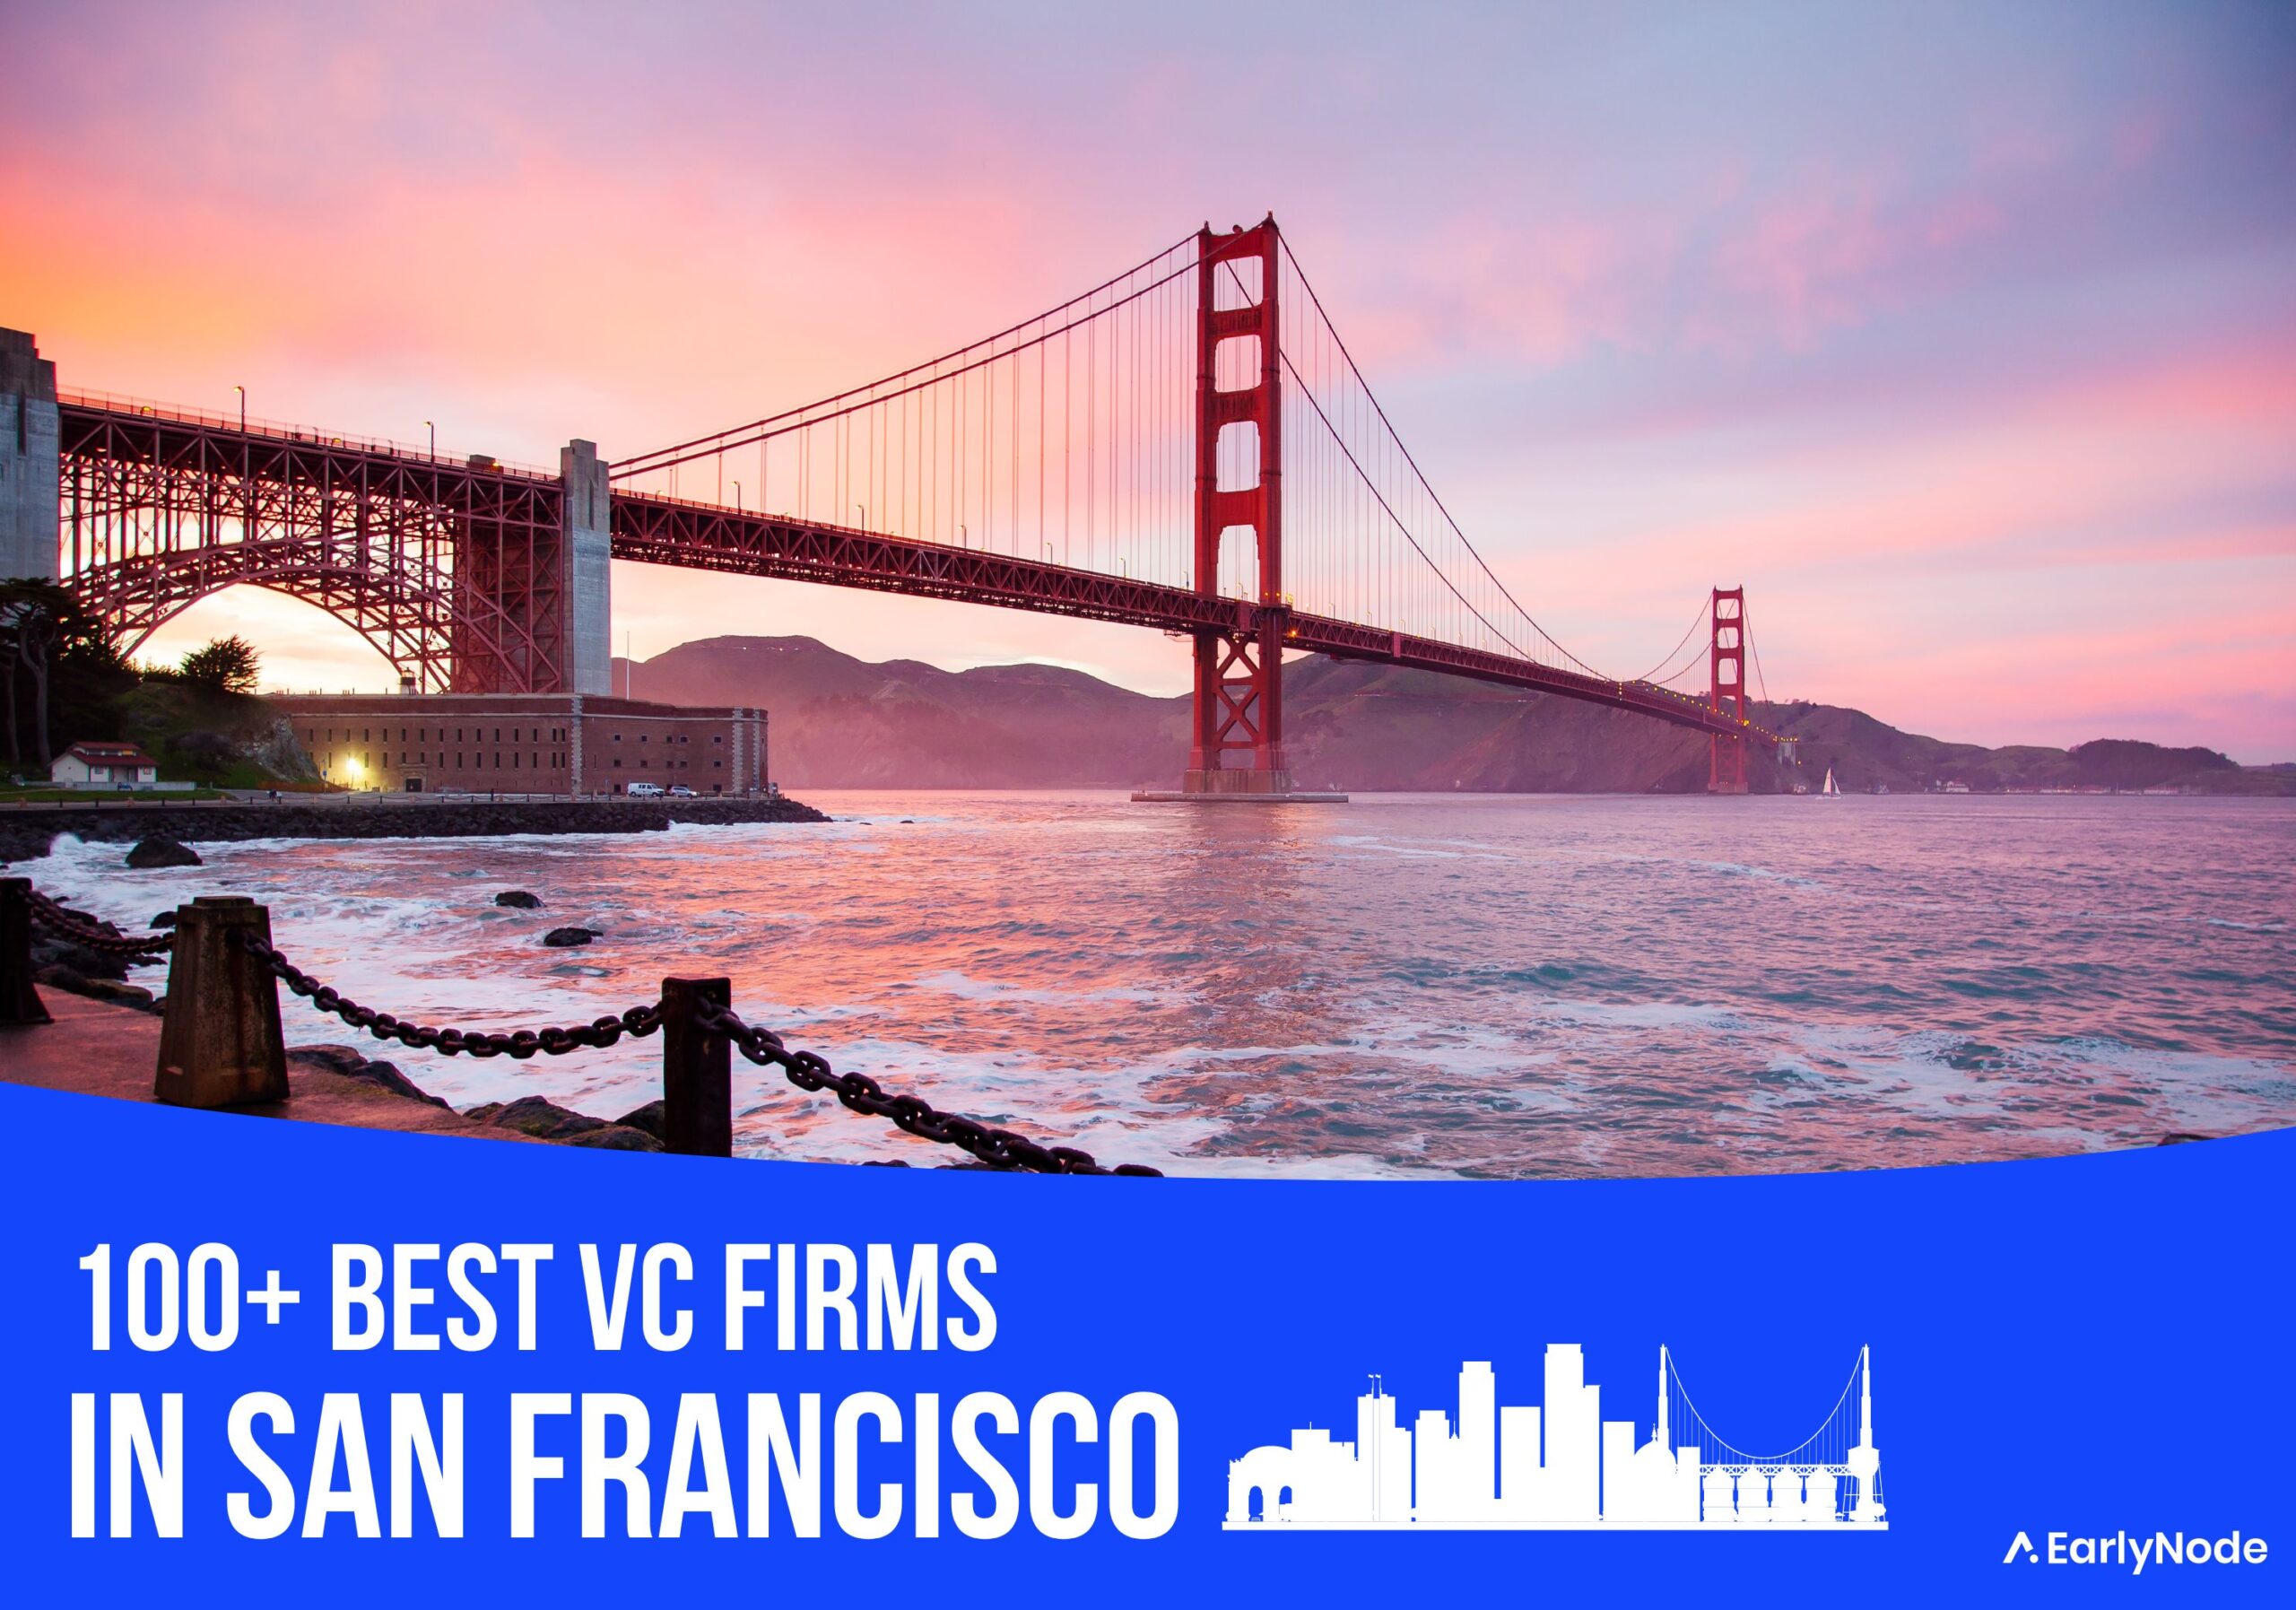 19 Top VC Firms in San Francisco